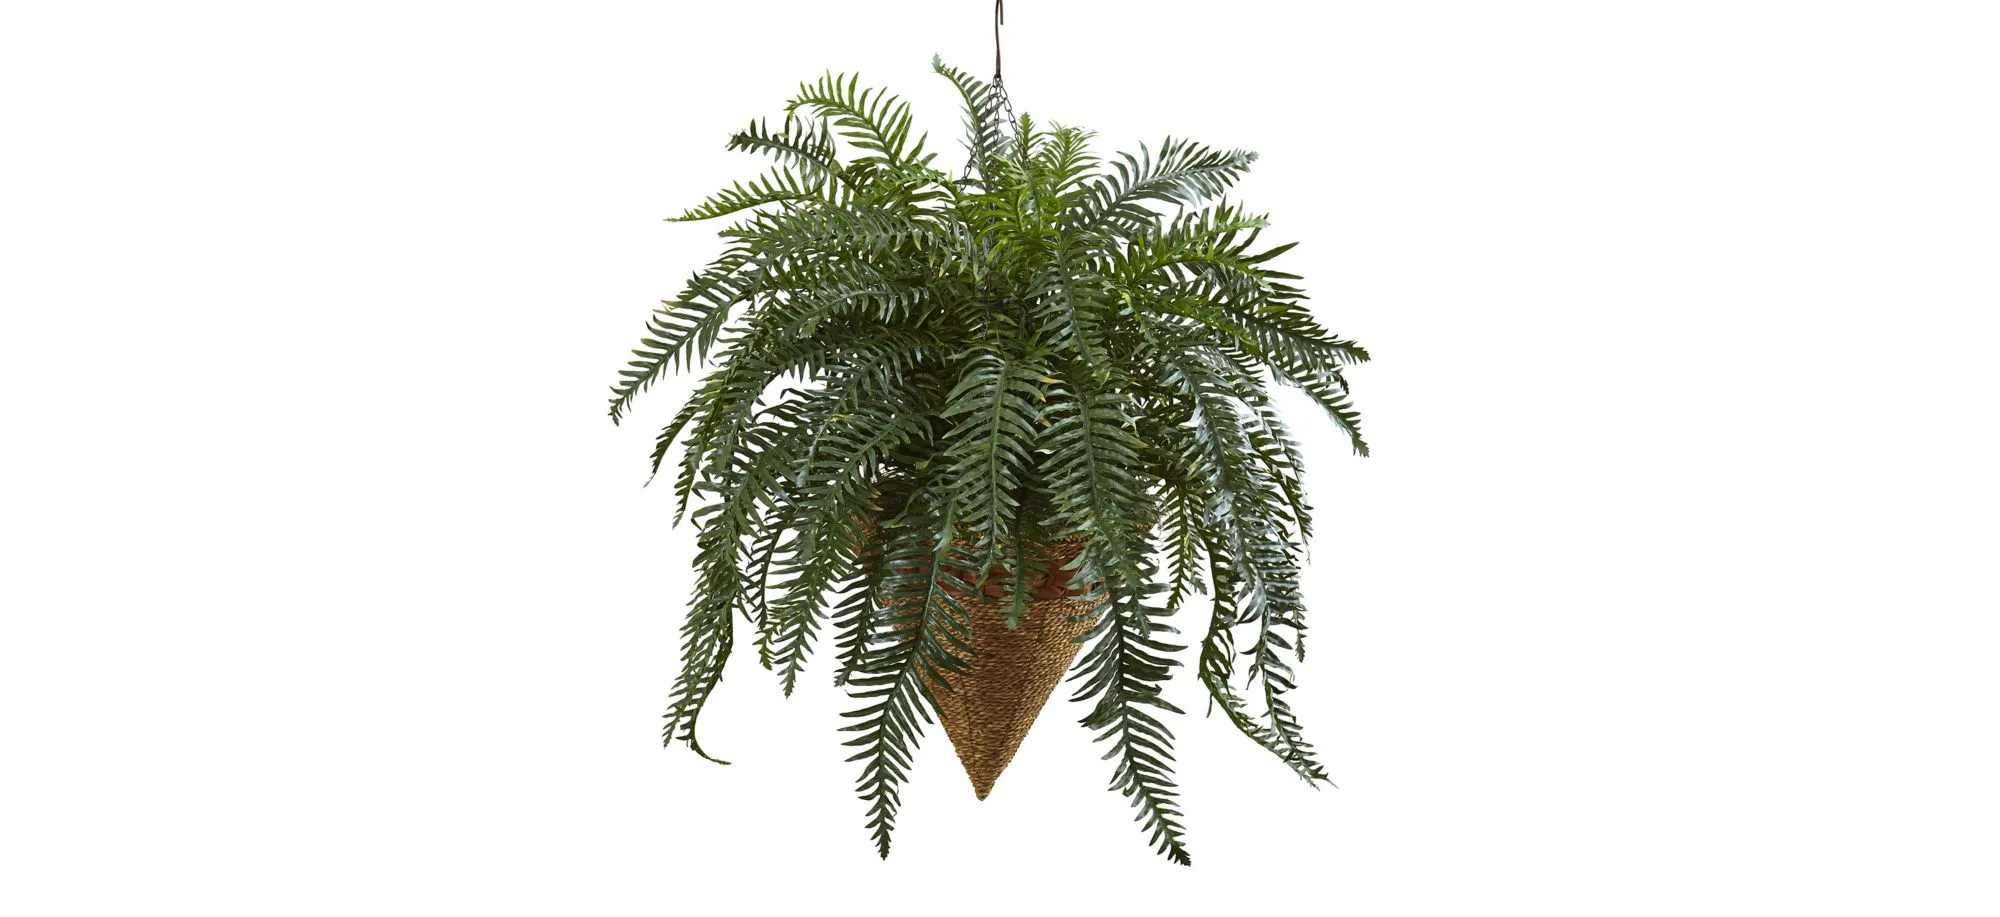 33in. Giant River Fern with Cone Hanging Basket in Green by Bellanest